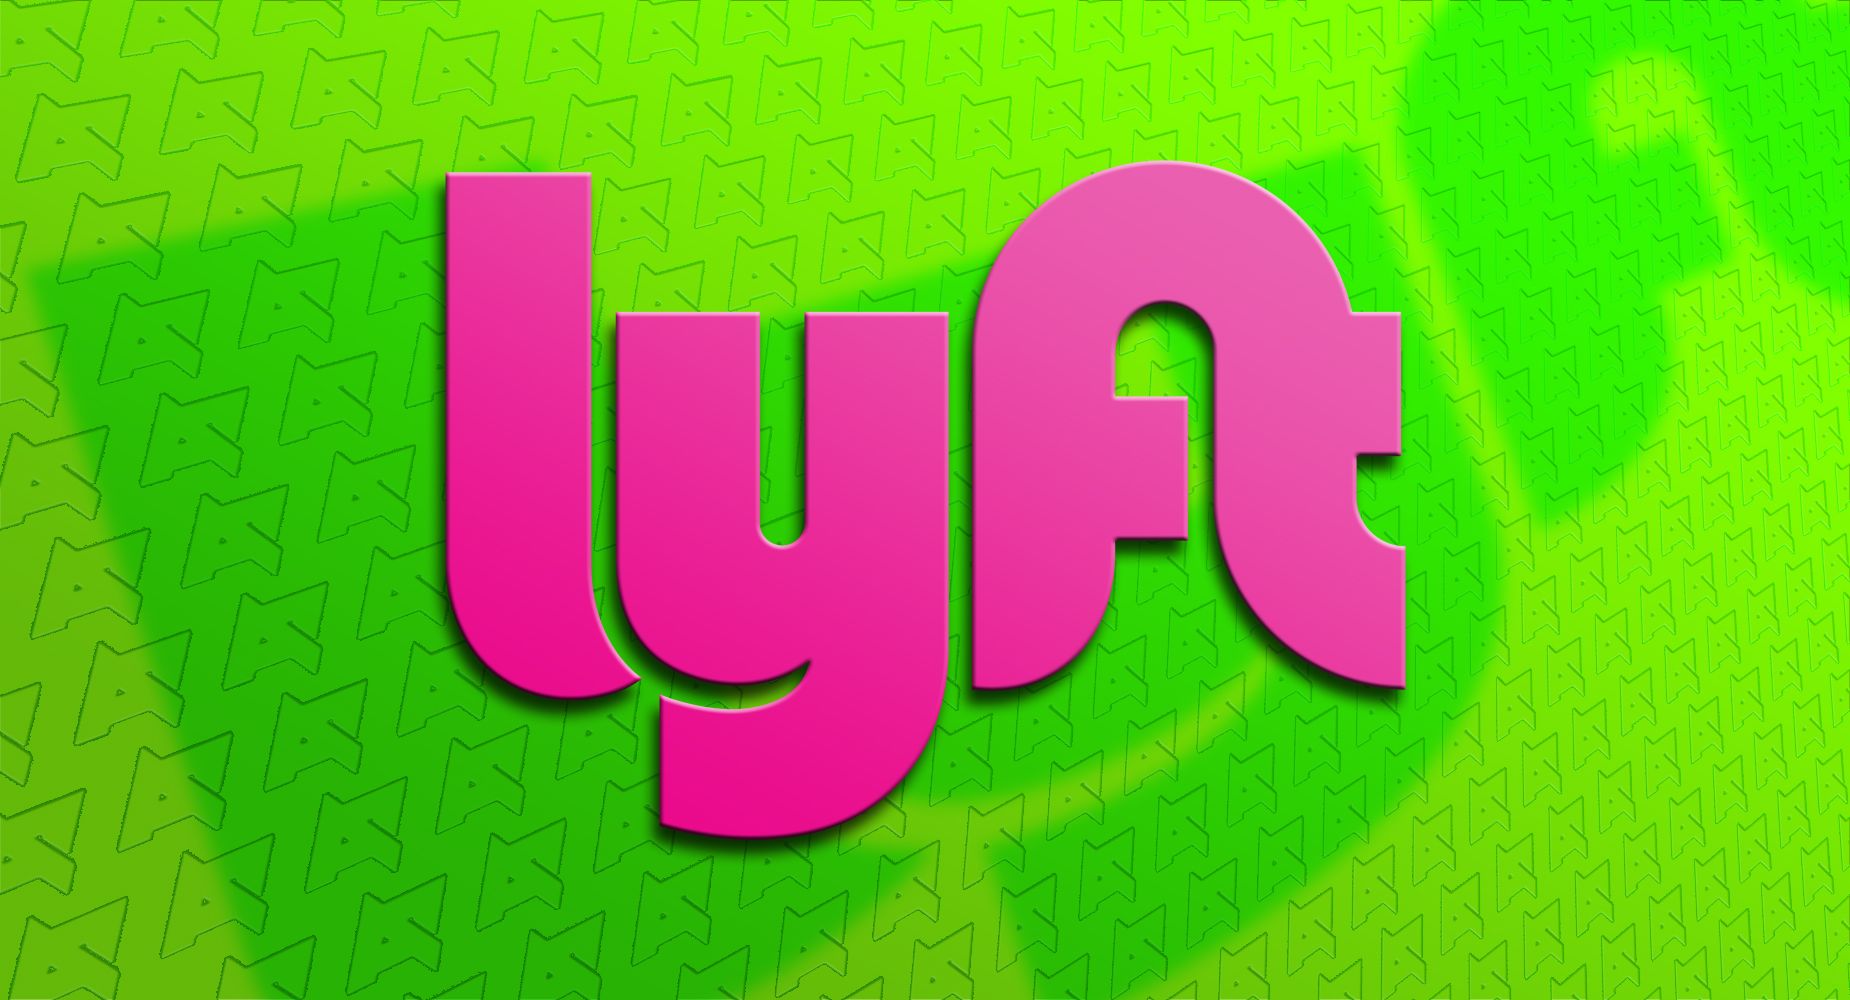 Lyft logo on a green background covered in Android Police logos